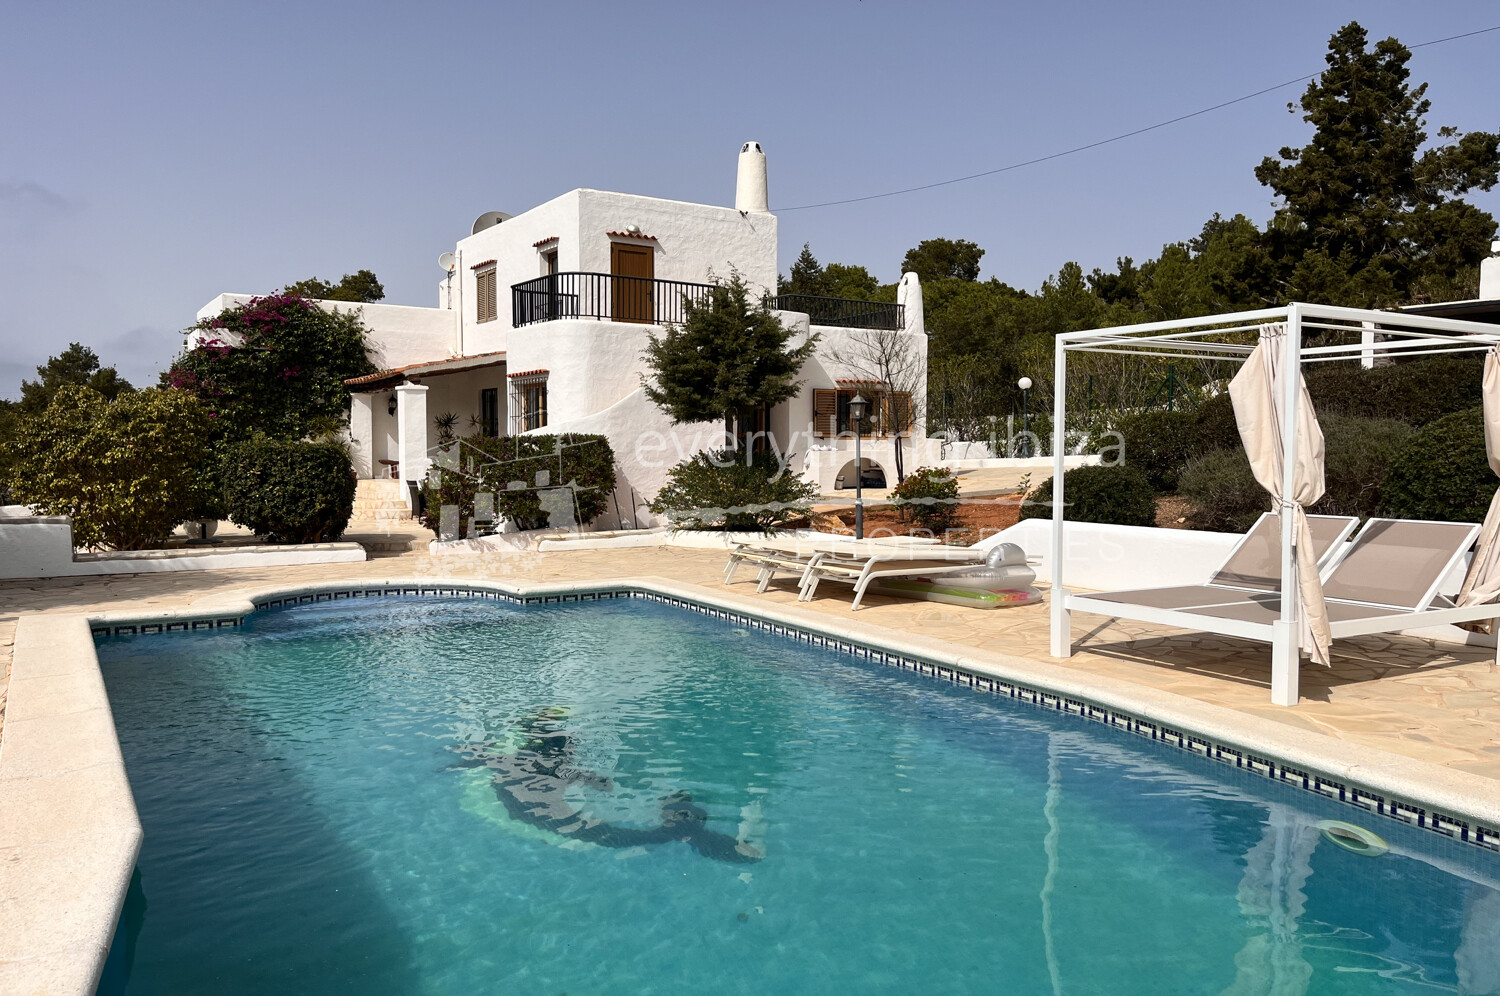 Charming Traditional Villa with Tourist License, Sea & Sunset Views, ref. 1682, for sale in Ibiza by everything ibiza Properties